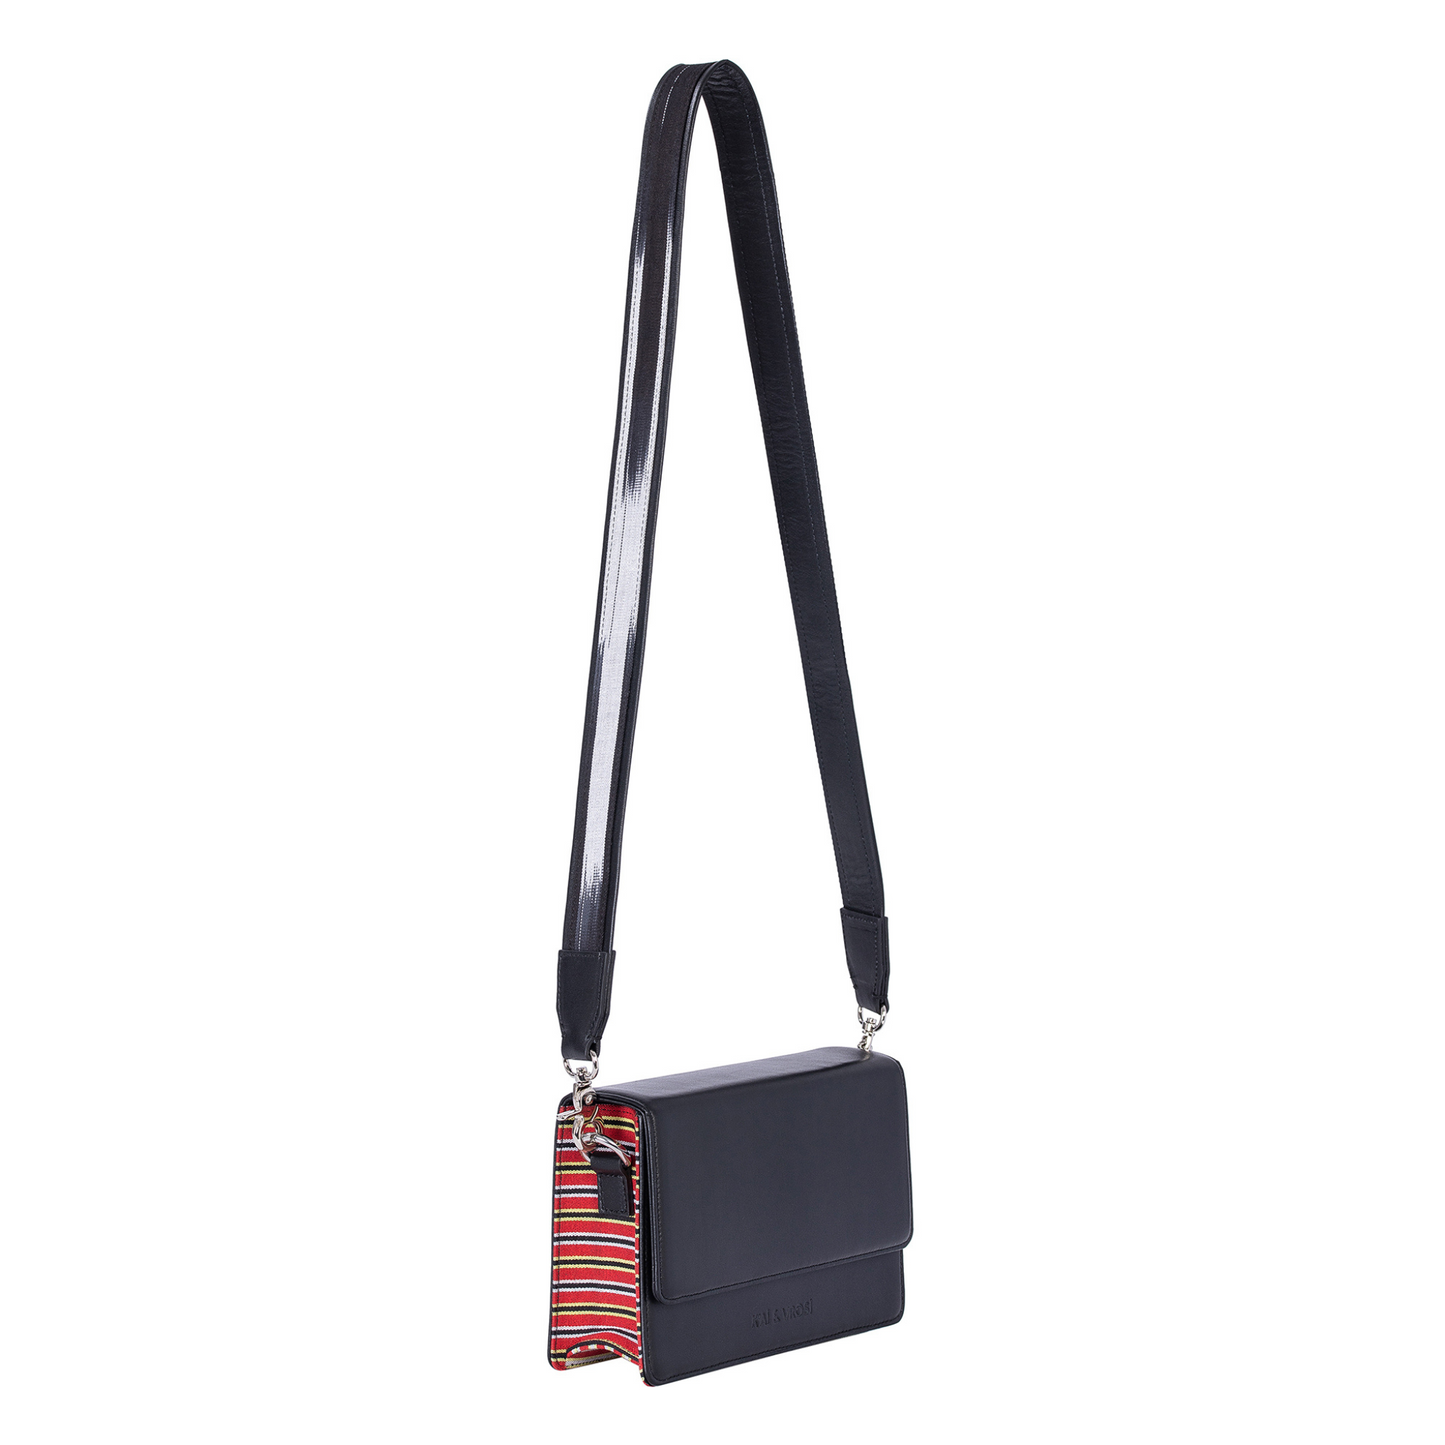 Black Leather Structured Crossbody Bag